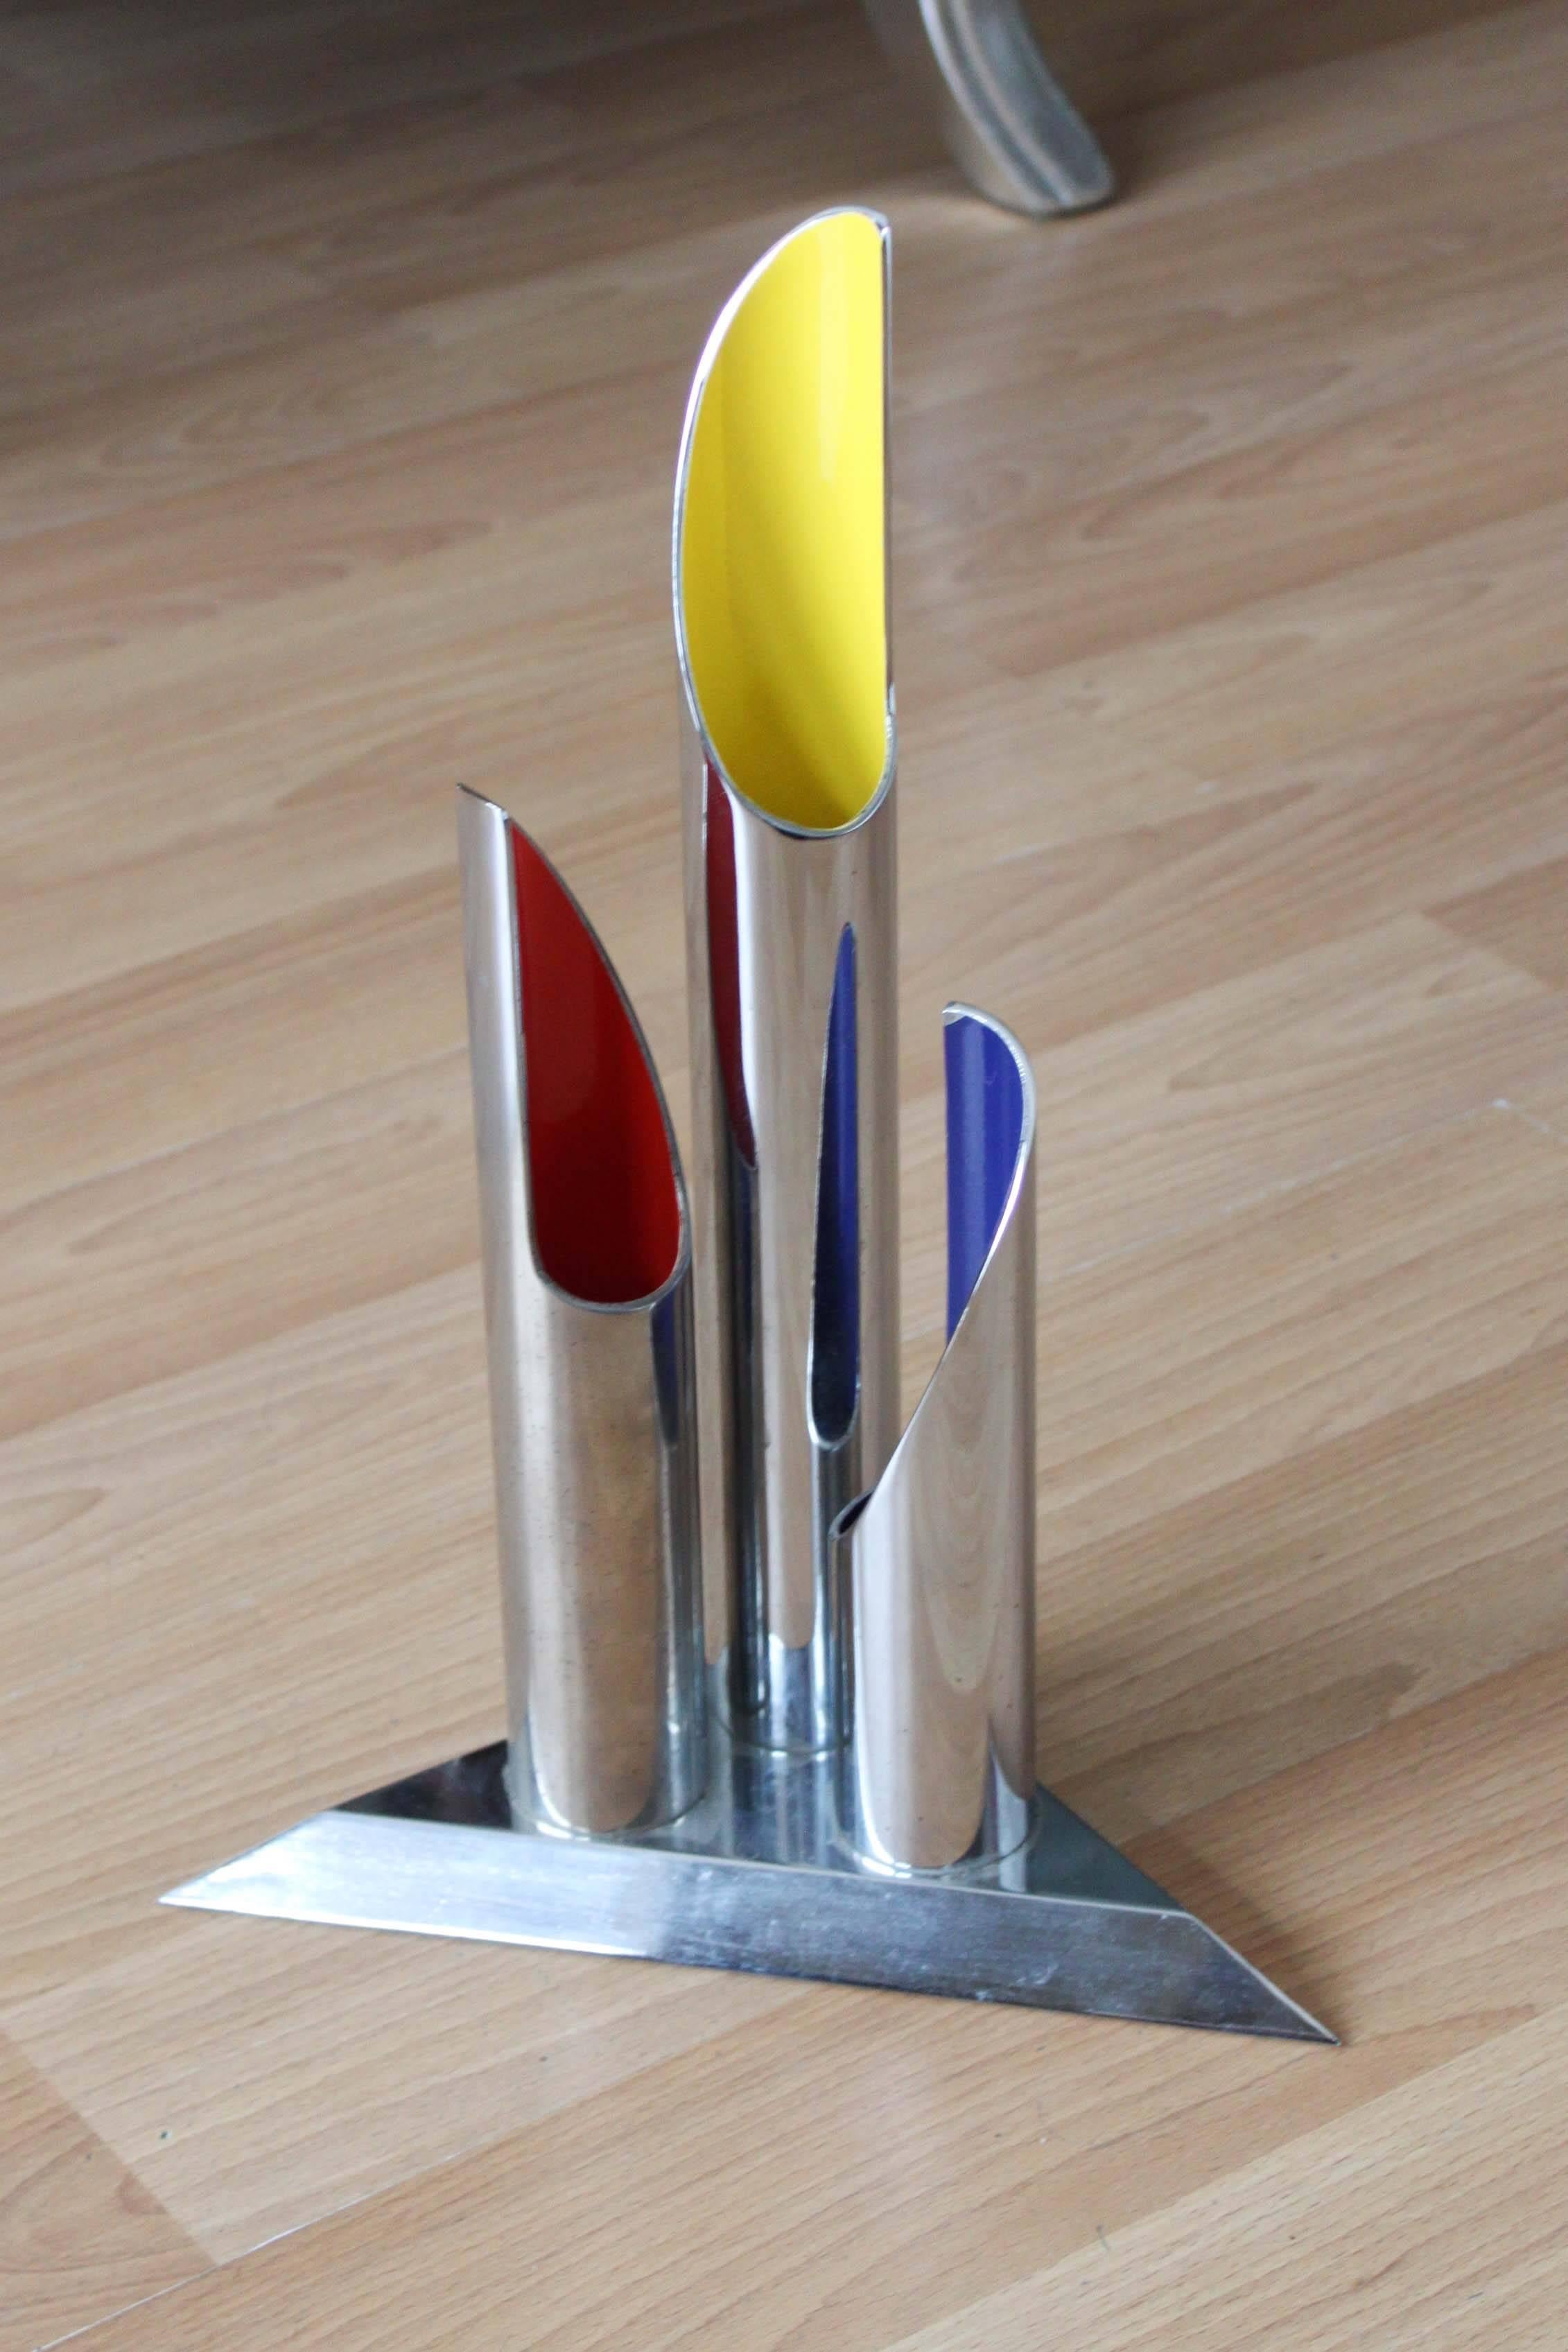 A modernist chrome and enamel bud vase with triangular base. Very heavy, in good condition with minor wear consistent with age and regular use.